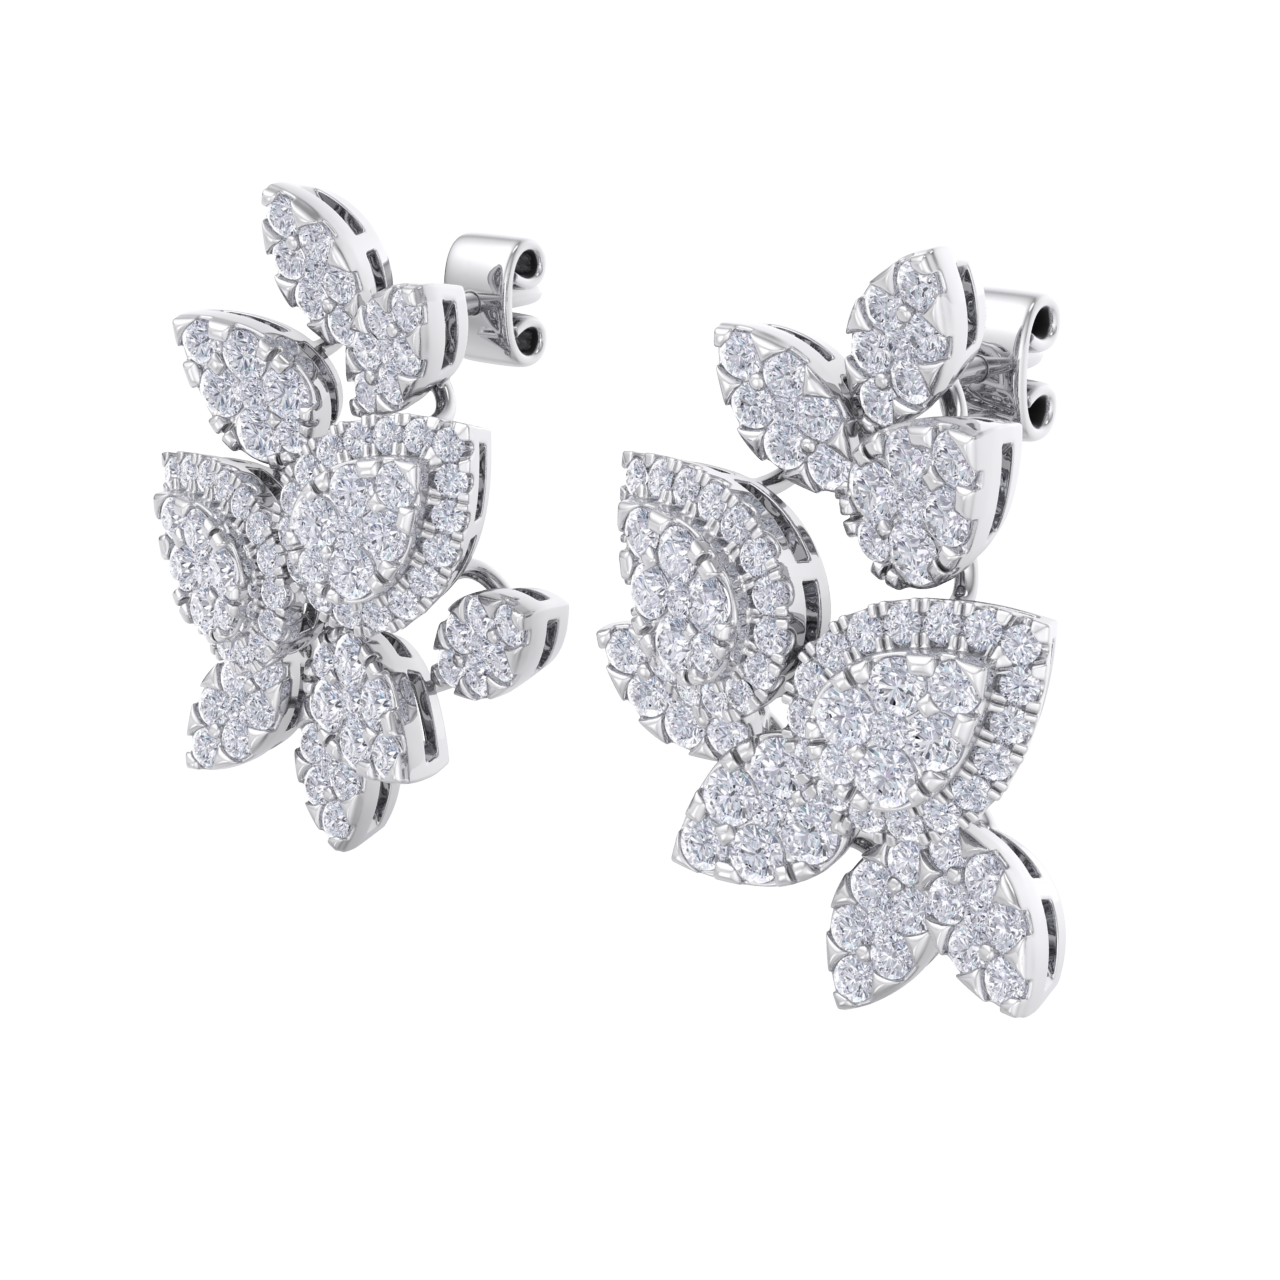 Flower shaped stud earrings in rose gold with white diamonds of 3.11 ct in weight